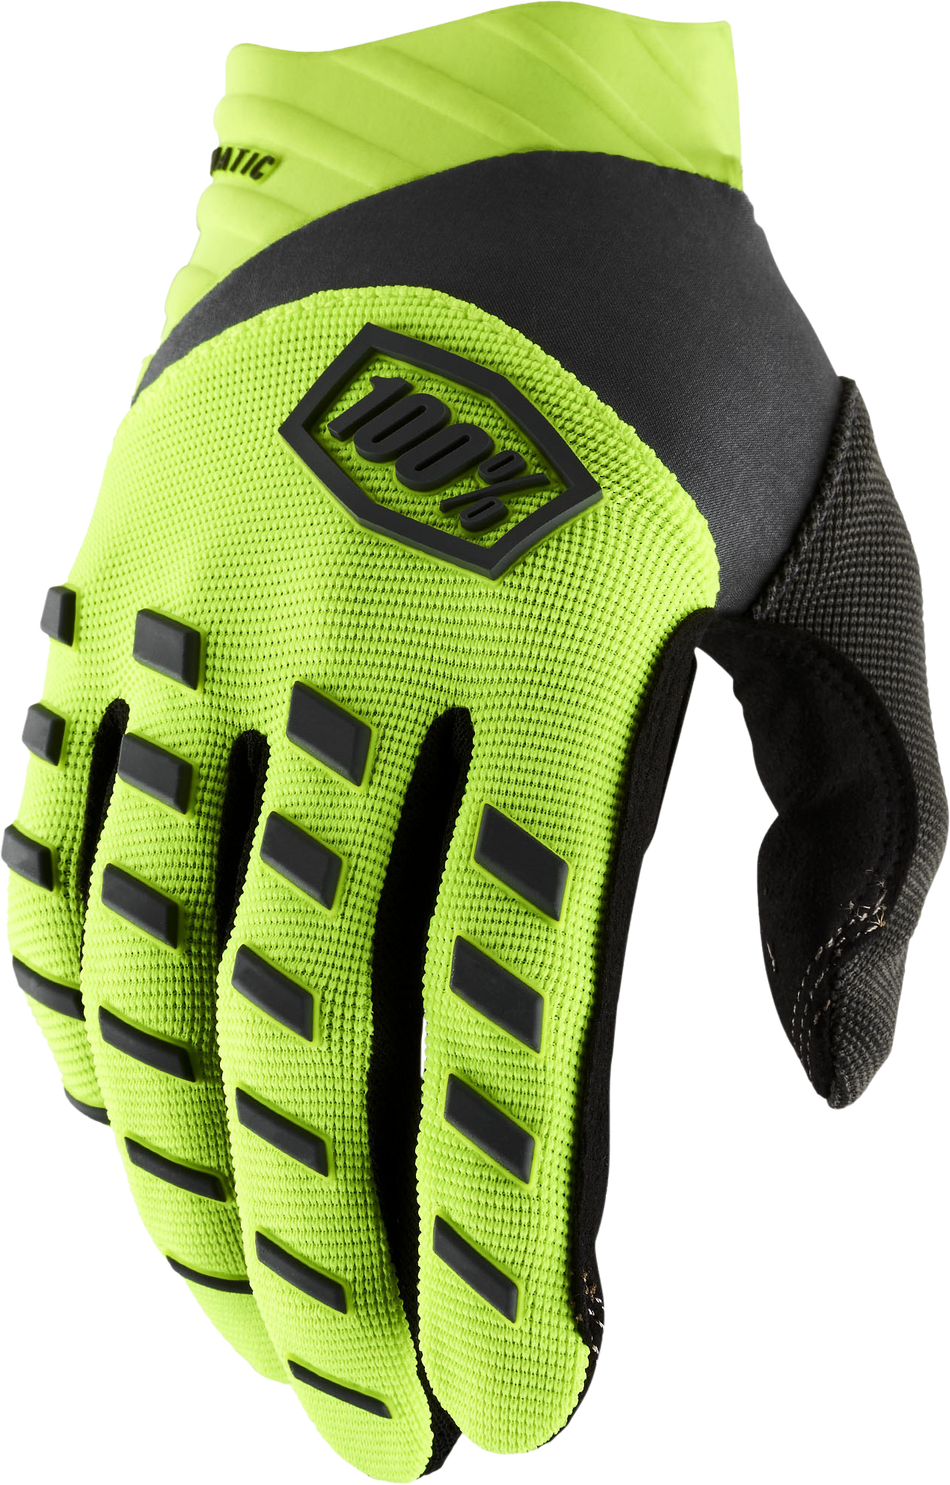 100% Airmatic Youth Gloves Fluo Yellow/Black Xl 10001-00007